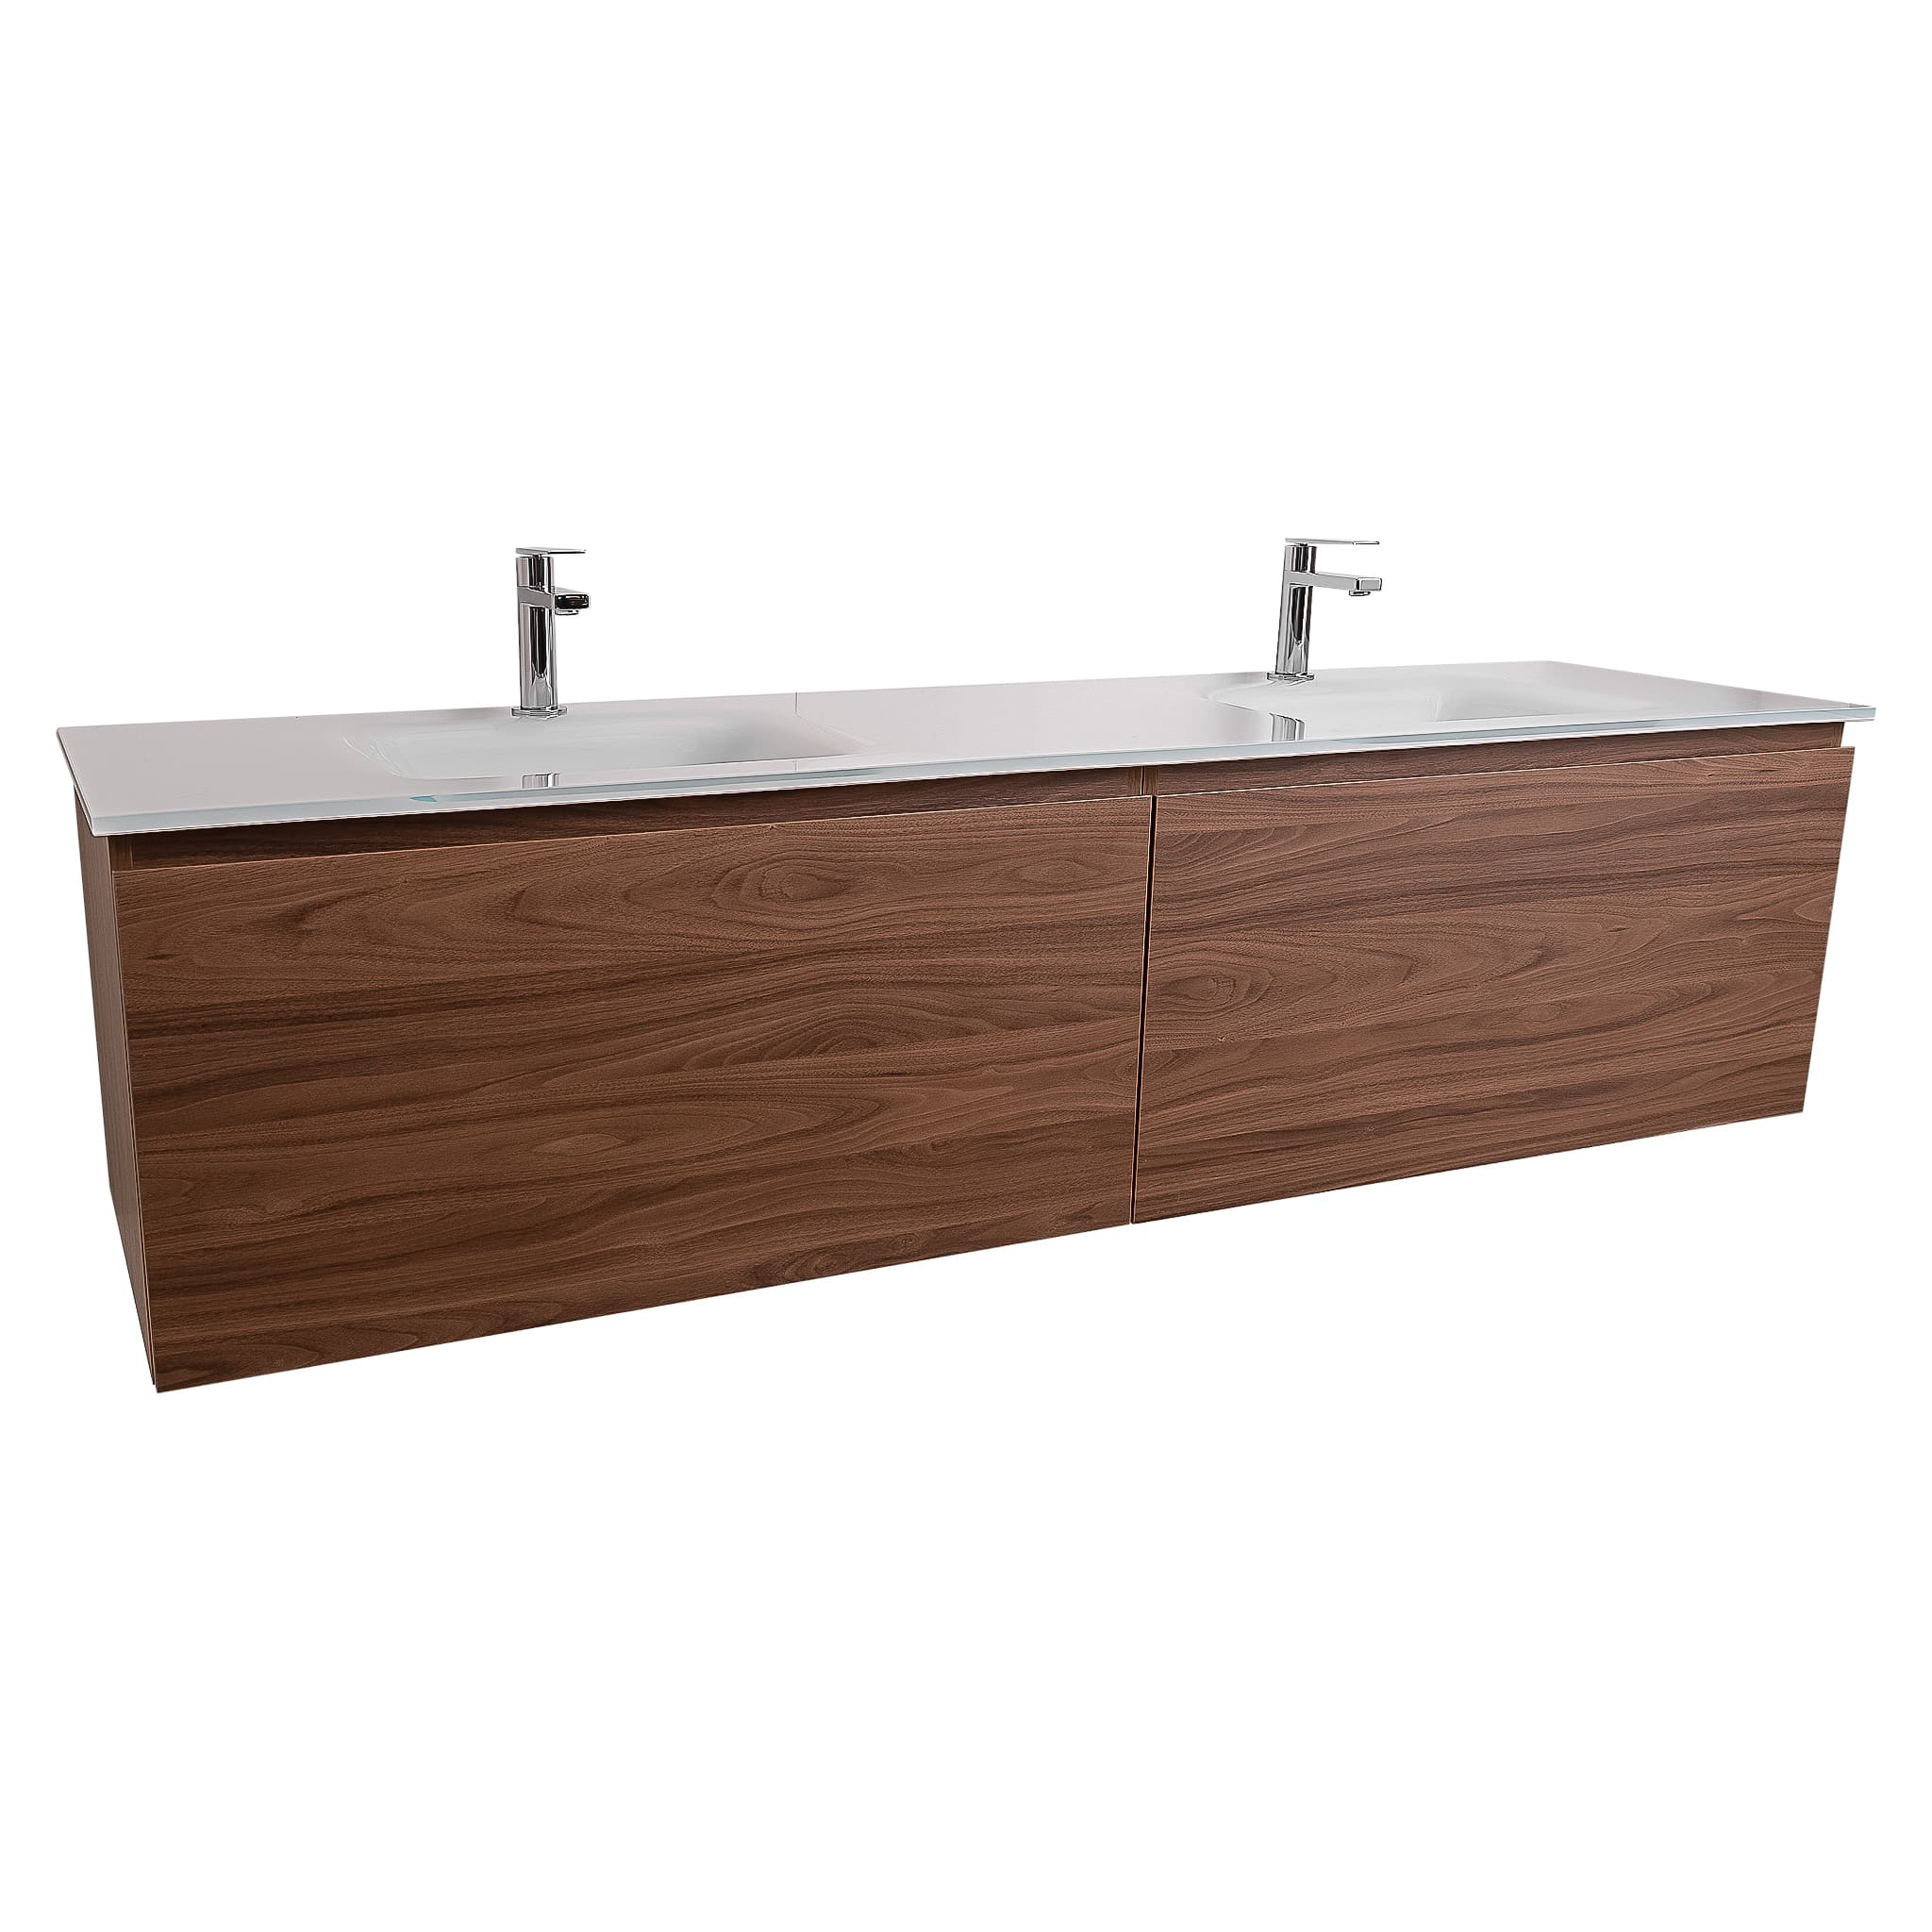 Venice 63 Walnut Wood Texture Cabinet, White Tempered Glass Double Sink, Wall Mounted Modern Vanity Set